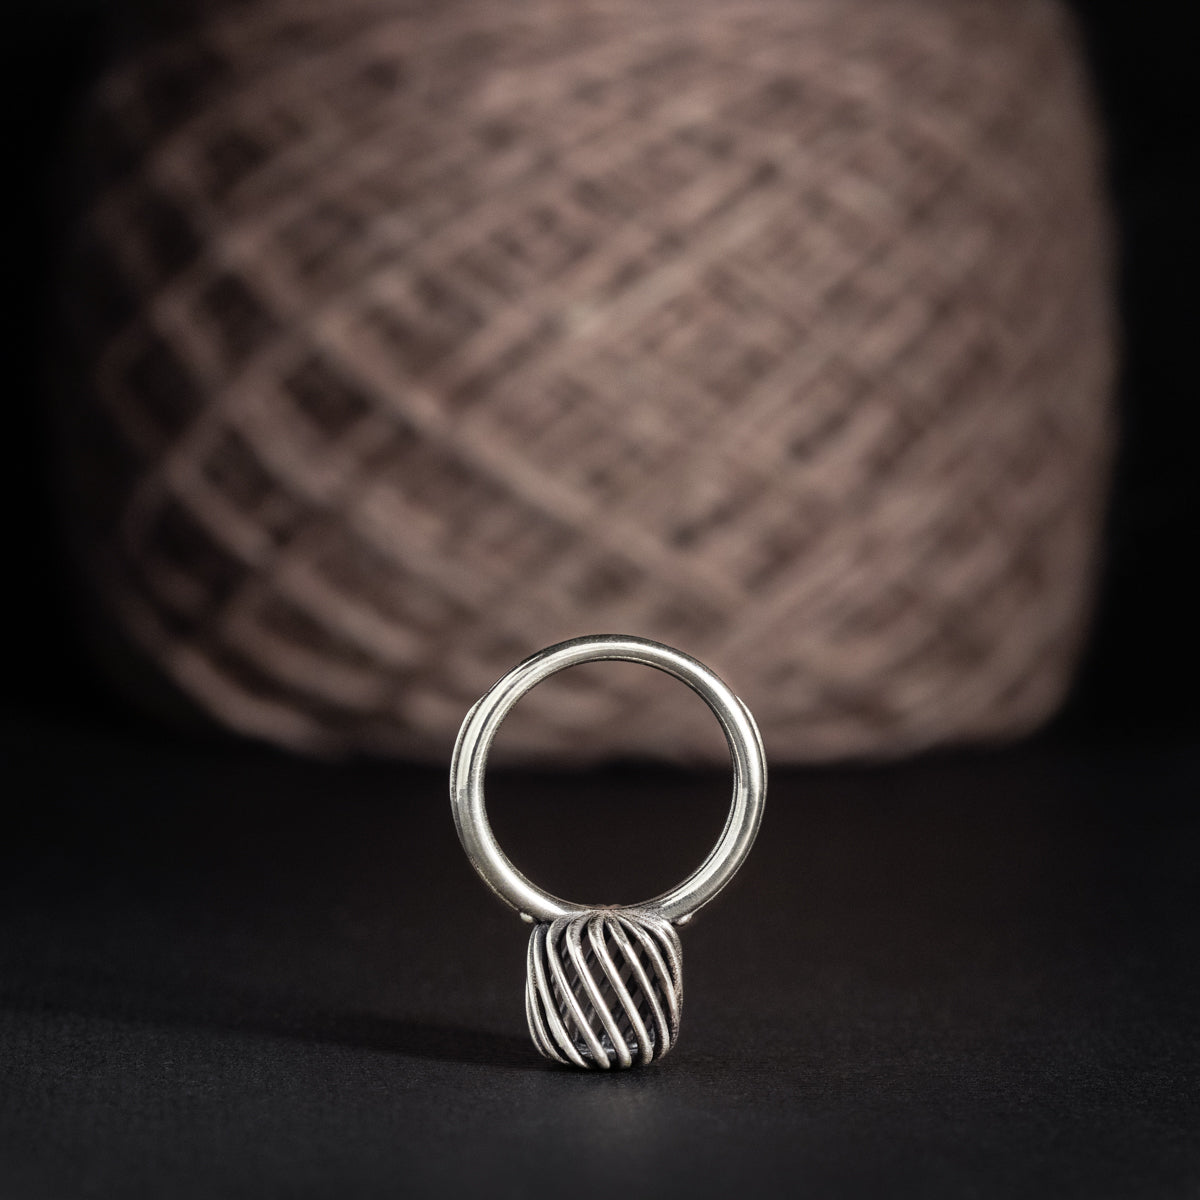 Sterling Silver Yarn Cake Ring With Knitting Needle Motif